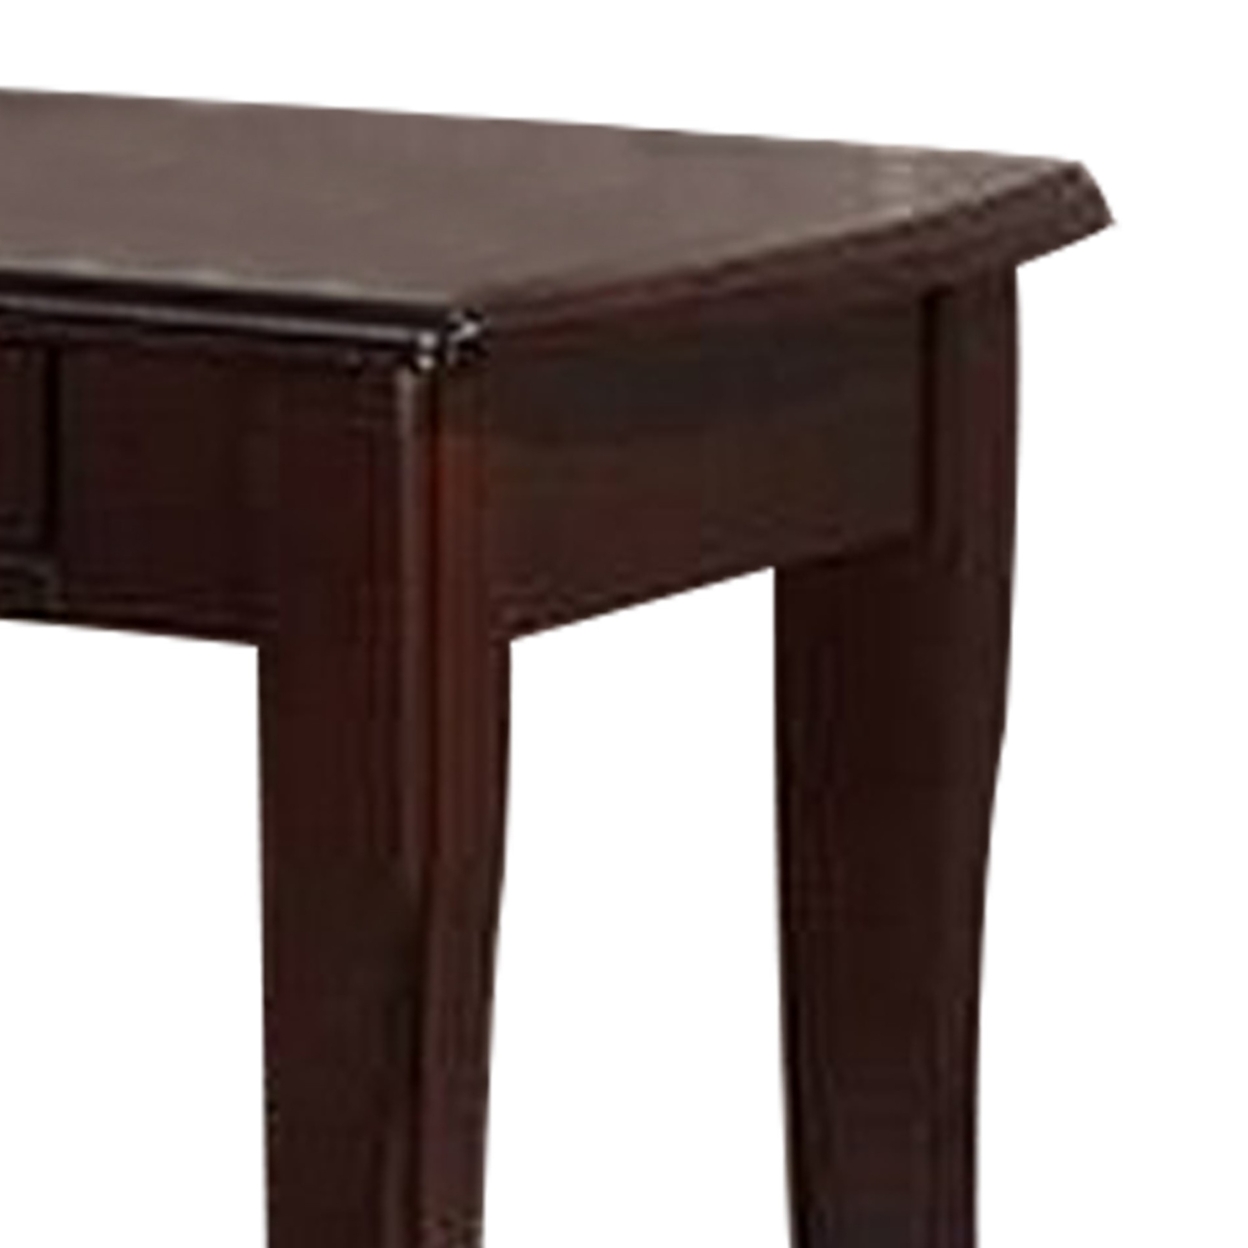 Jett 24 Inch Wood End Table With 1 Drawer, Bottom Shelf, Cherry Brown